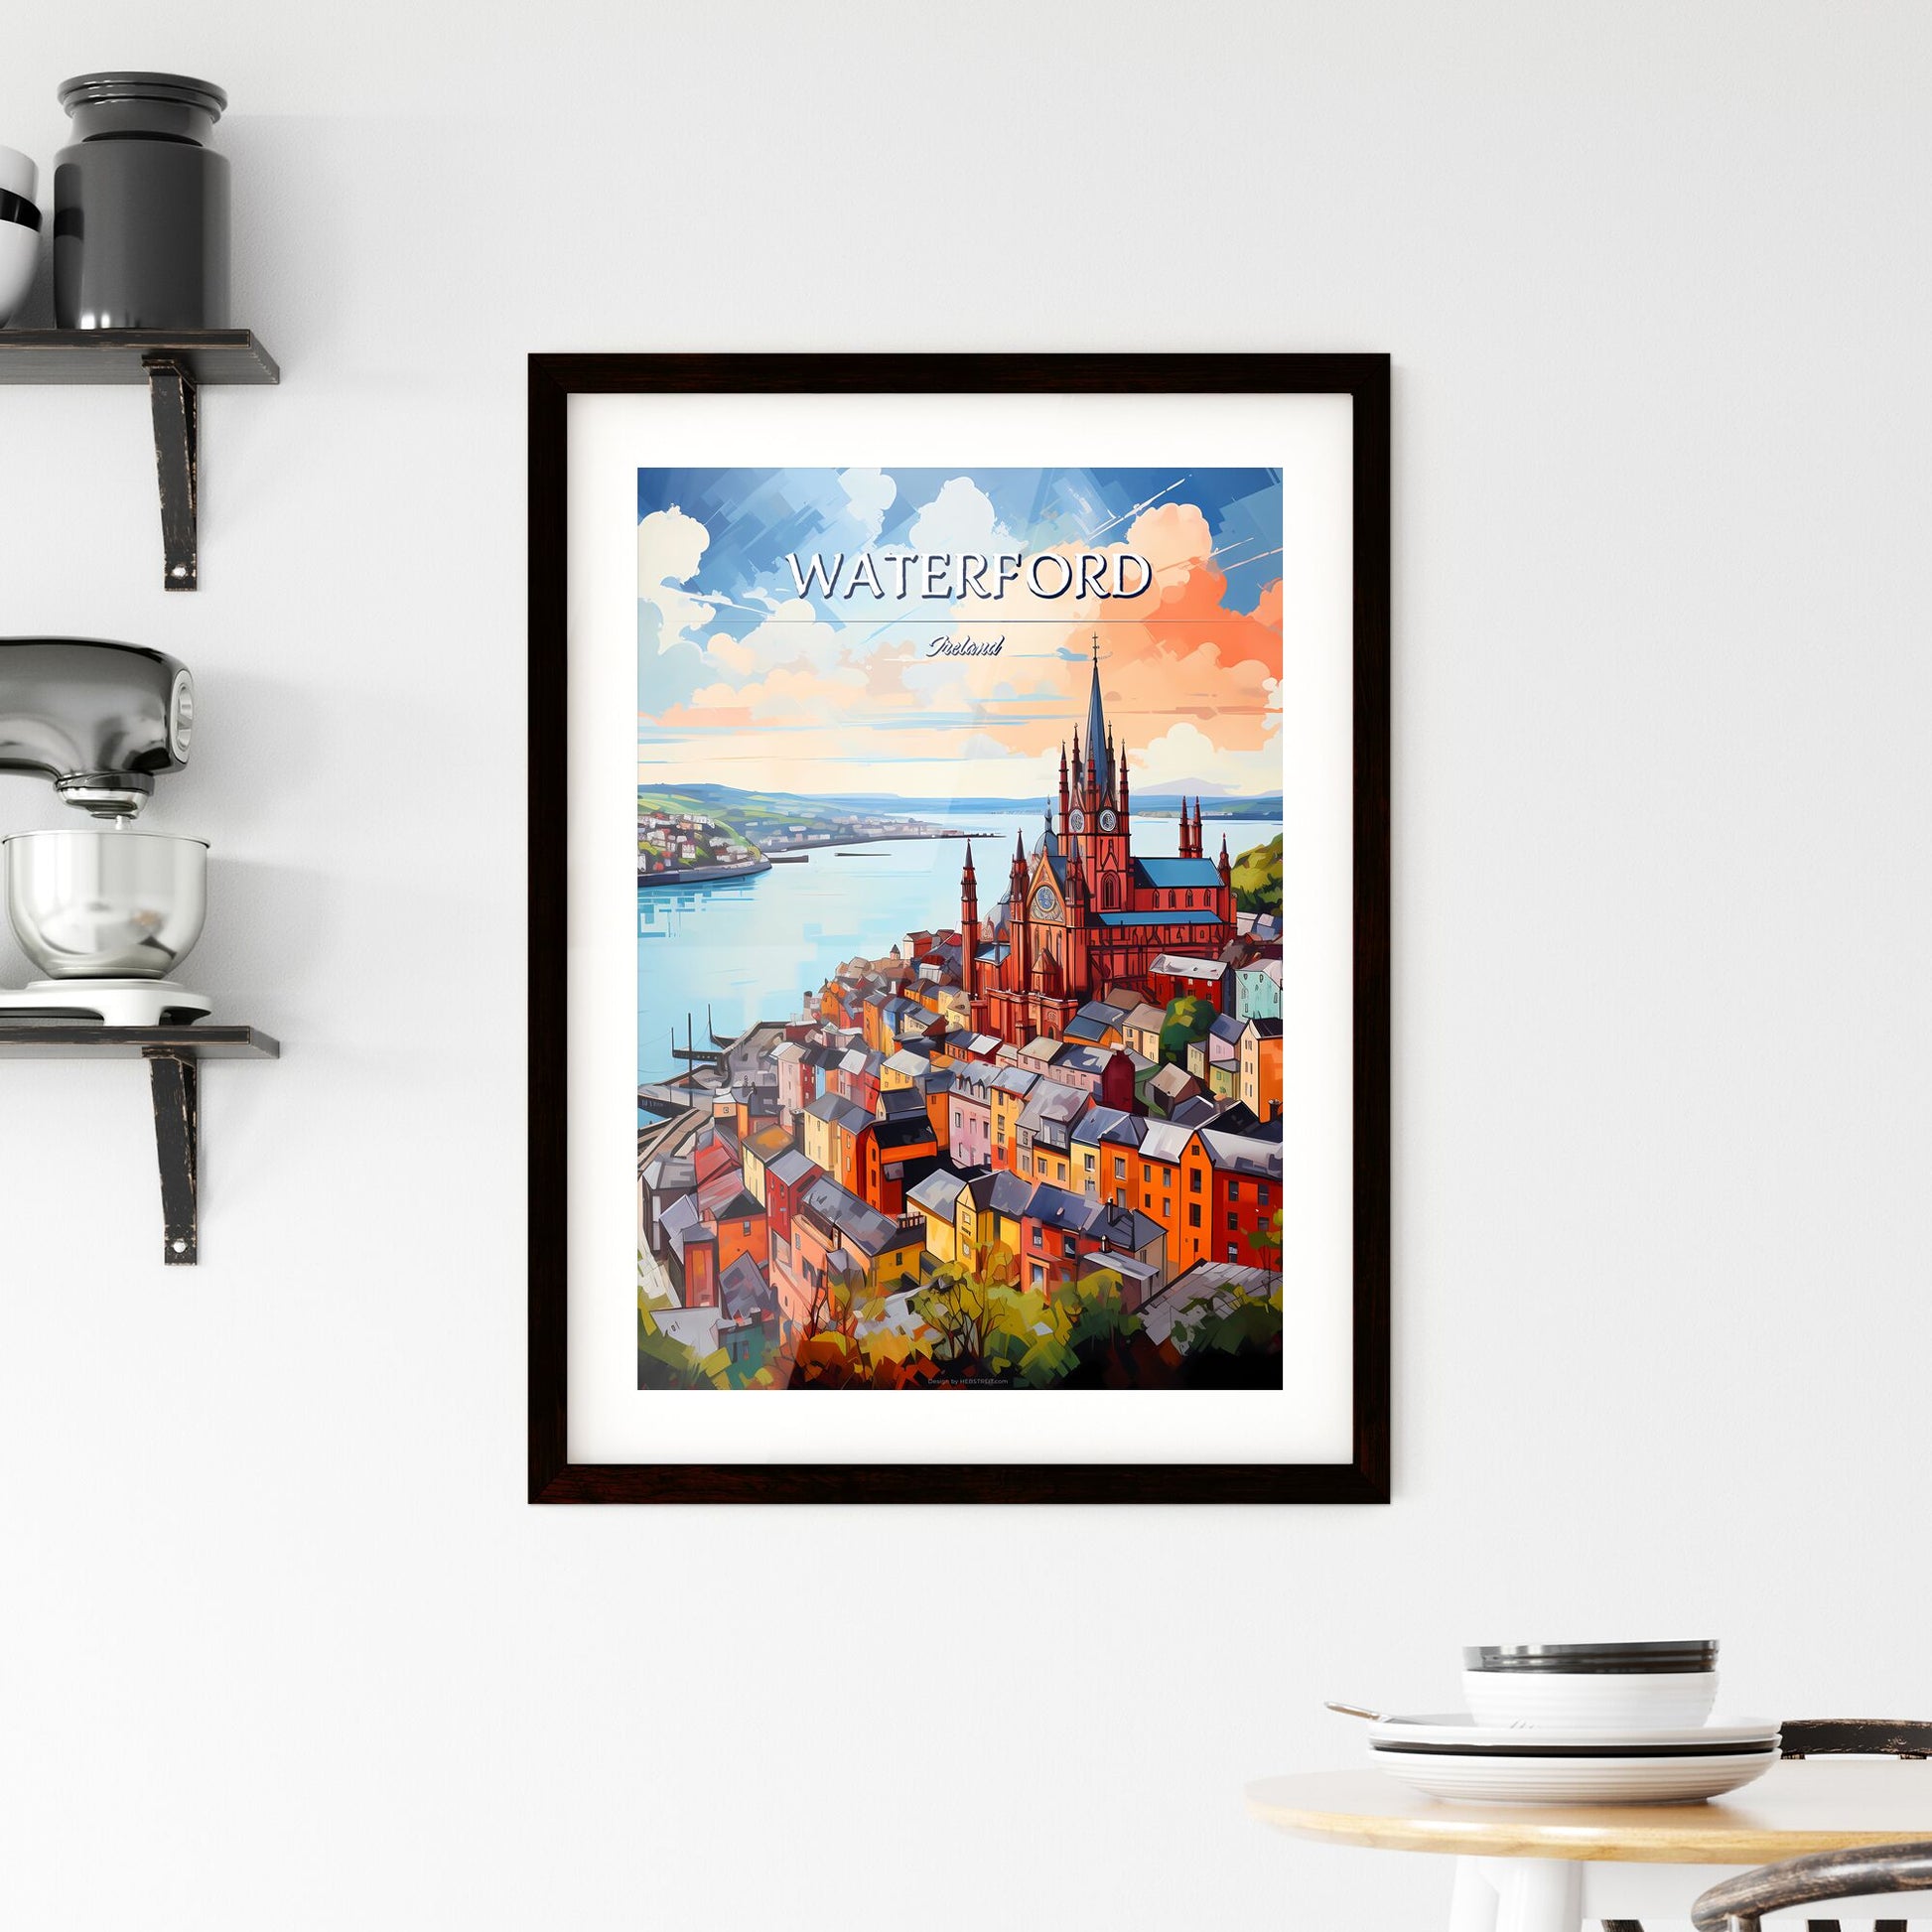 Waterford, Ireland - Art print of a city by the water Default Title